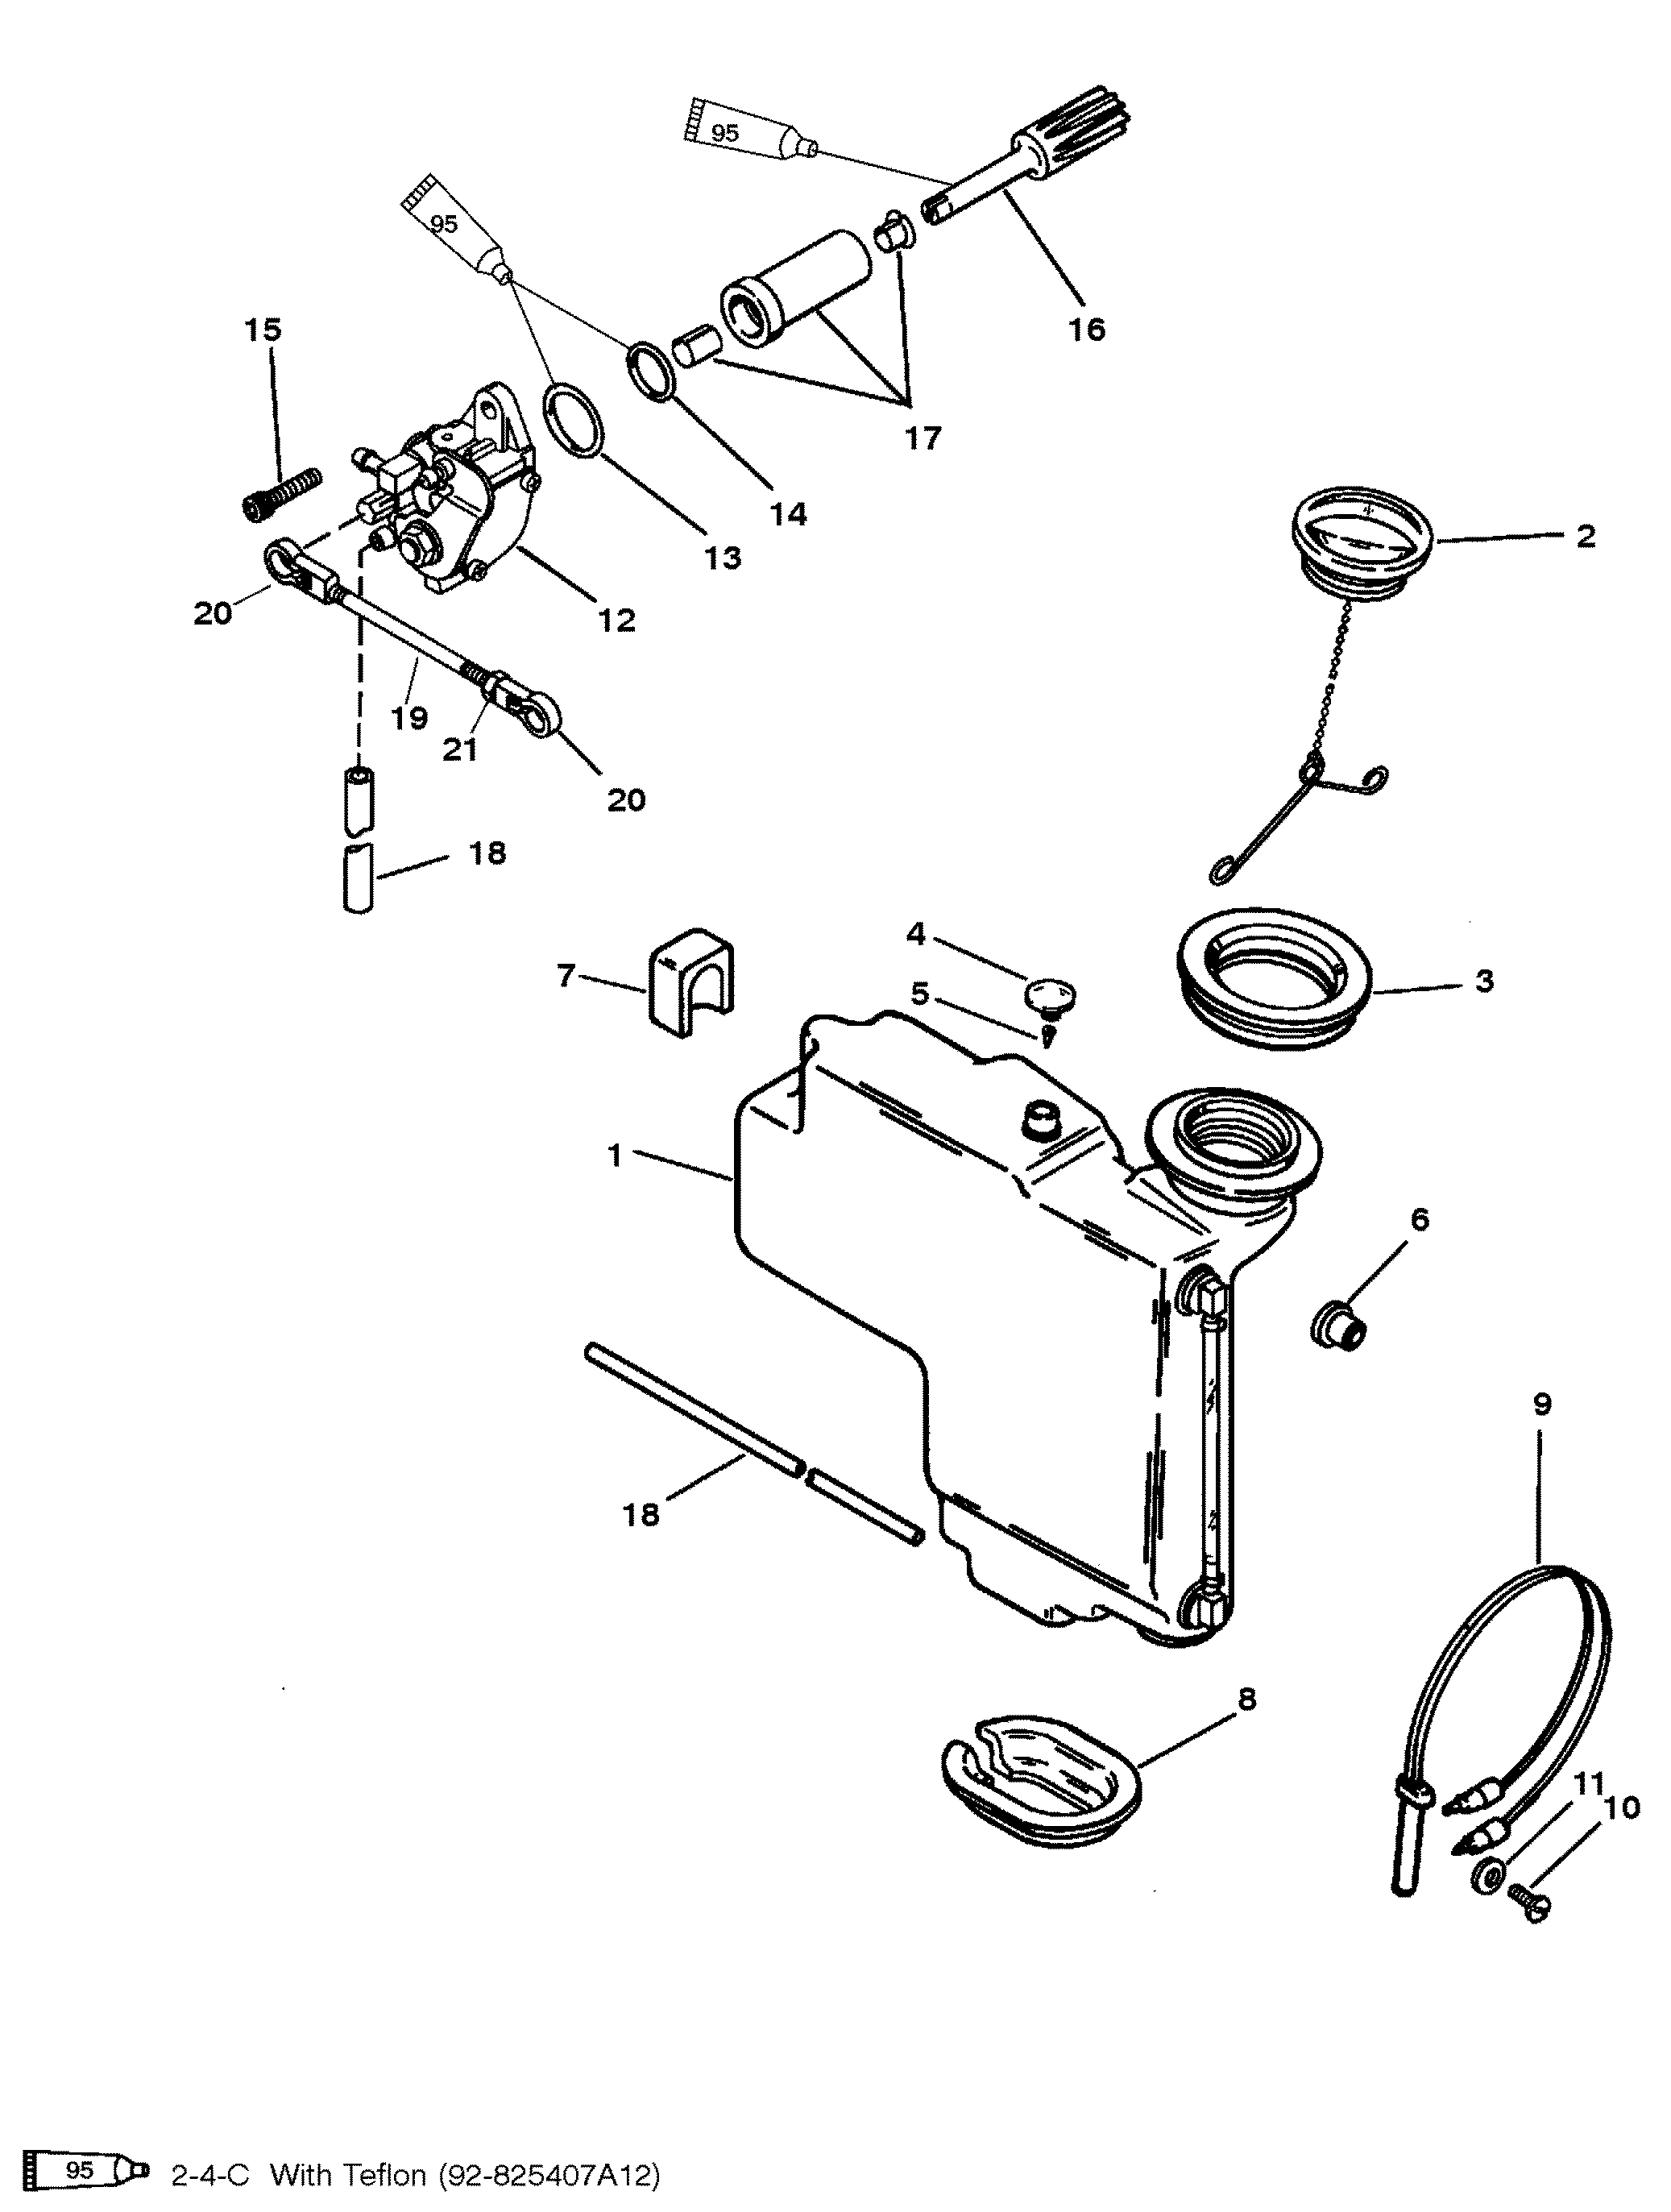 OIL INJECTION COMPONENTS